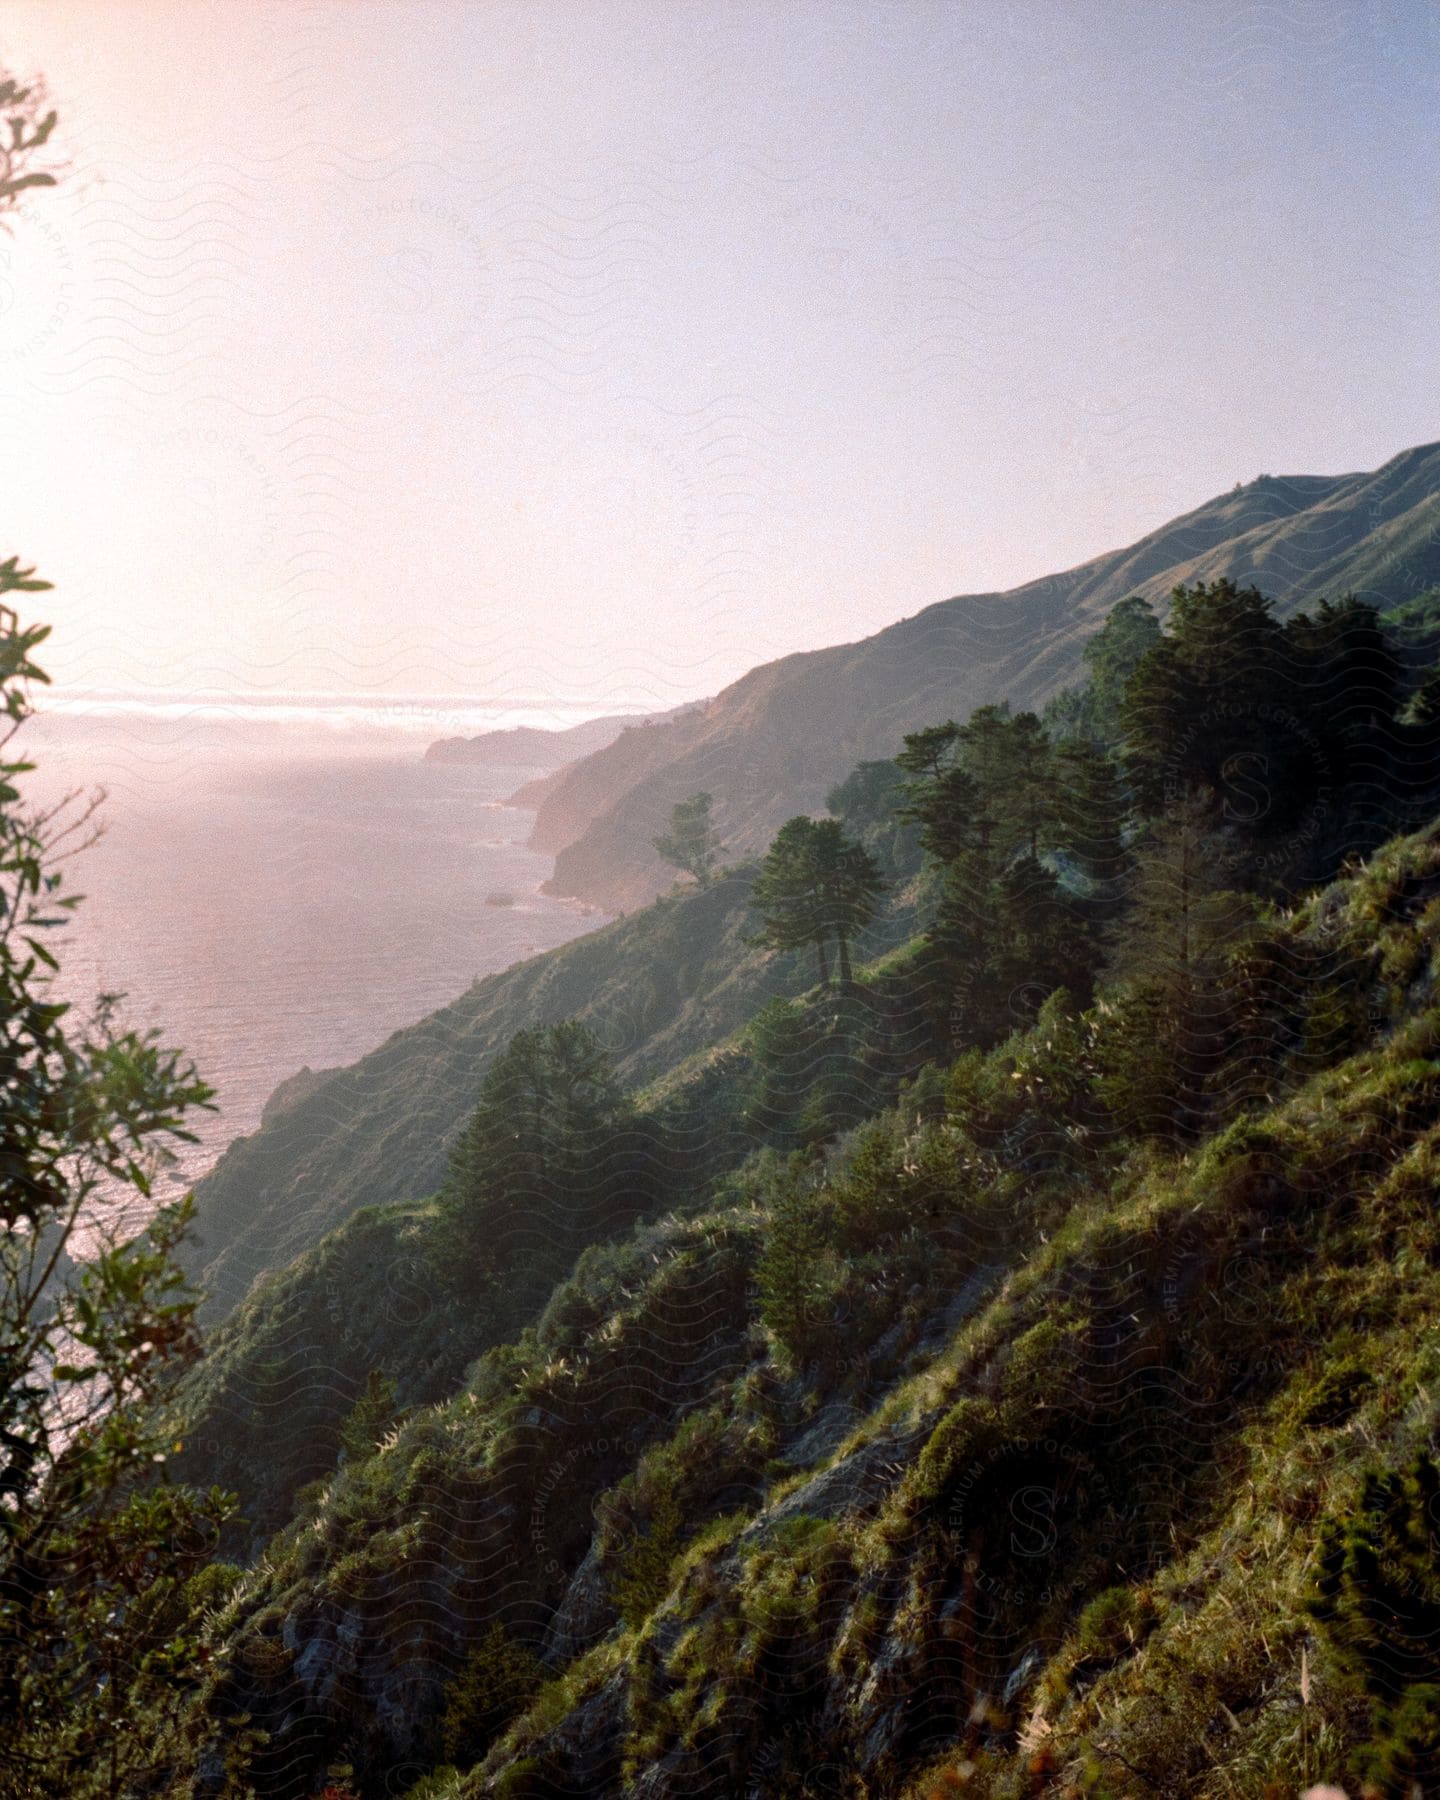 A serene view of a mountainous coast bathed in sunlight.